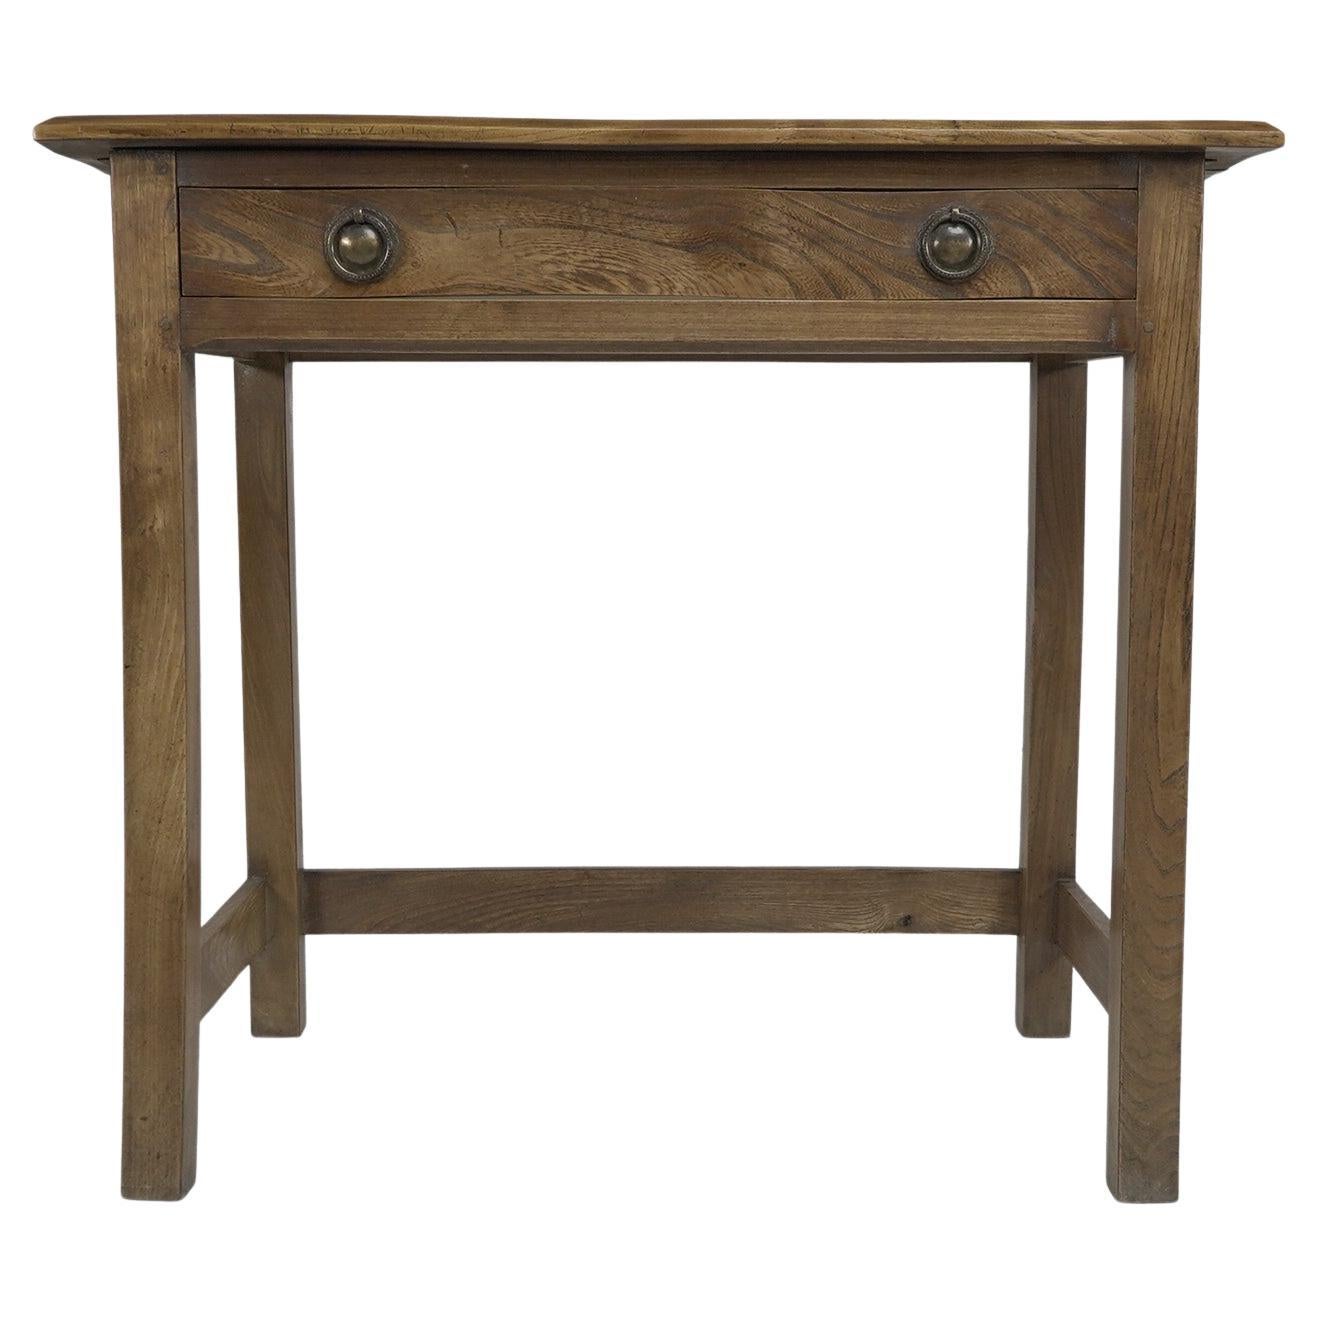 Gordon Russell. A fine quality Cotswold School ash single drawer desk For Sale